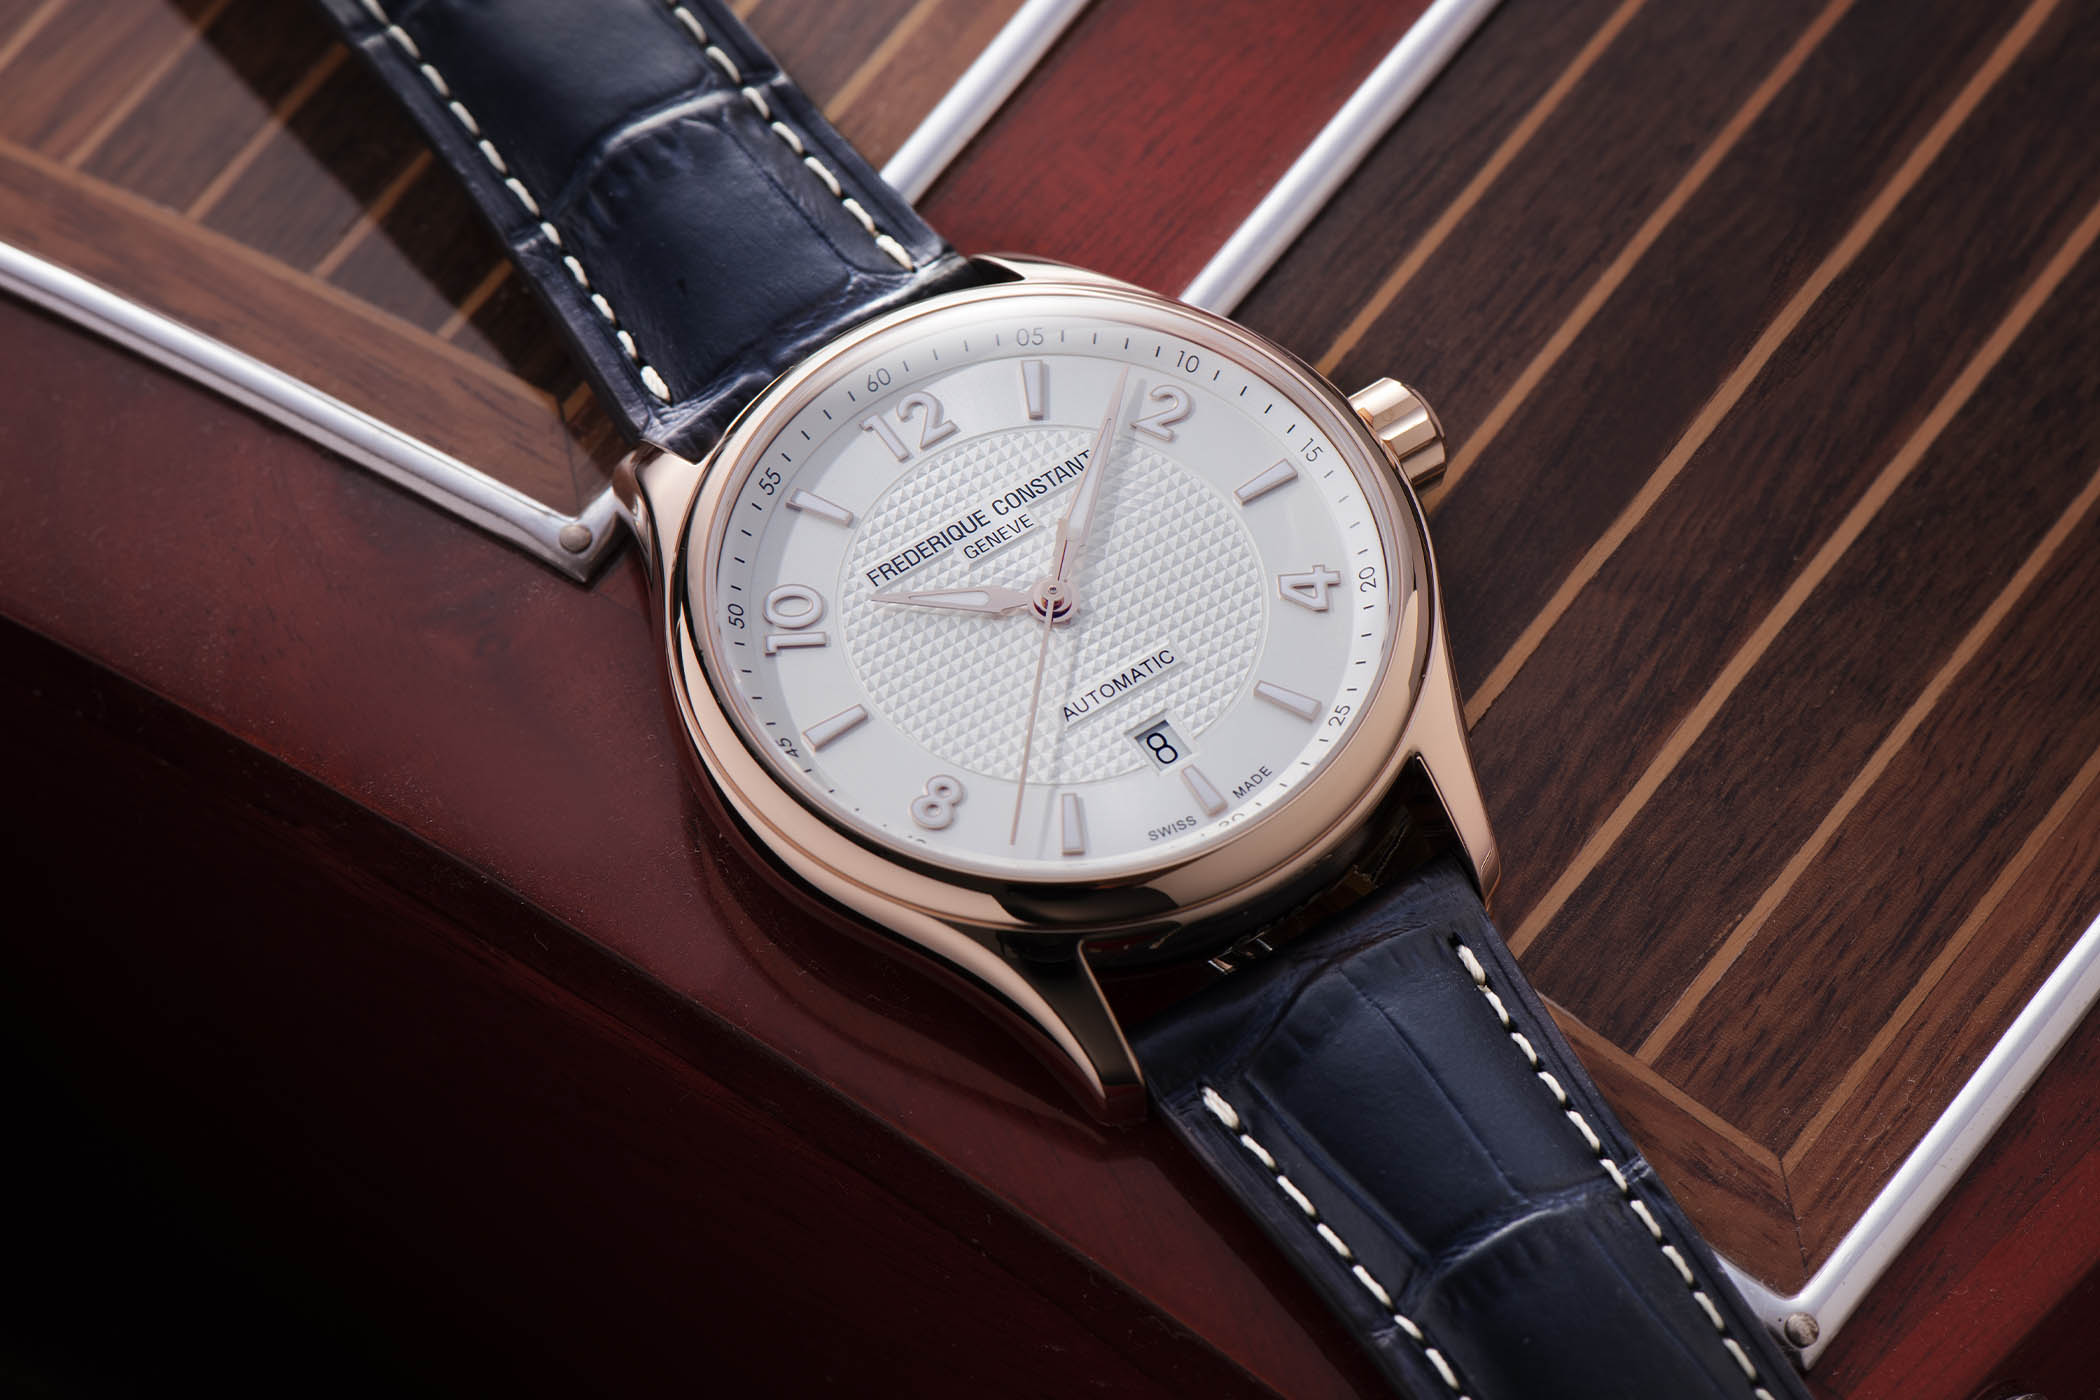 2022 Frederique Constant Runabout Automatic Limited Edition